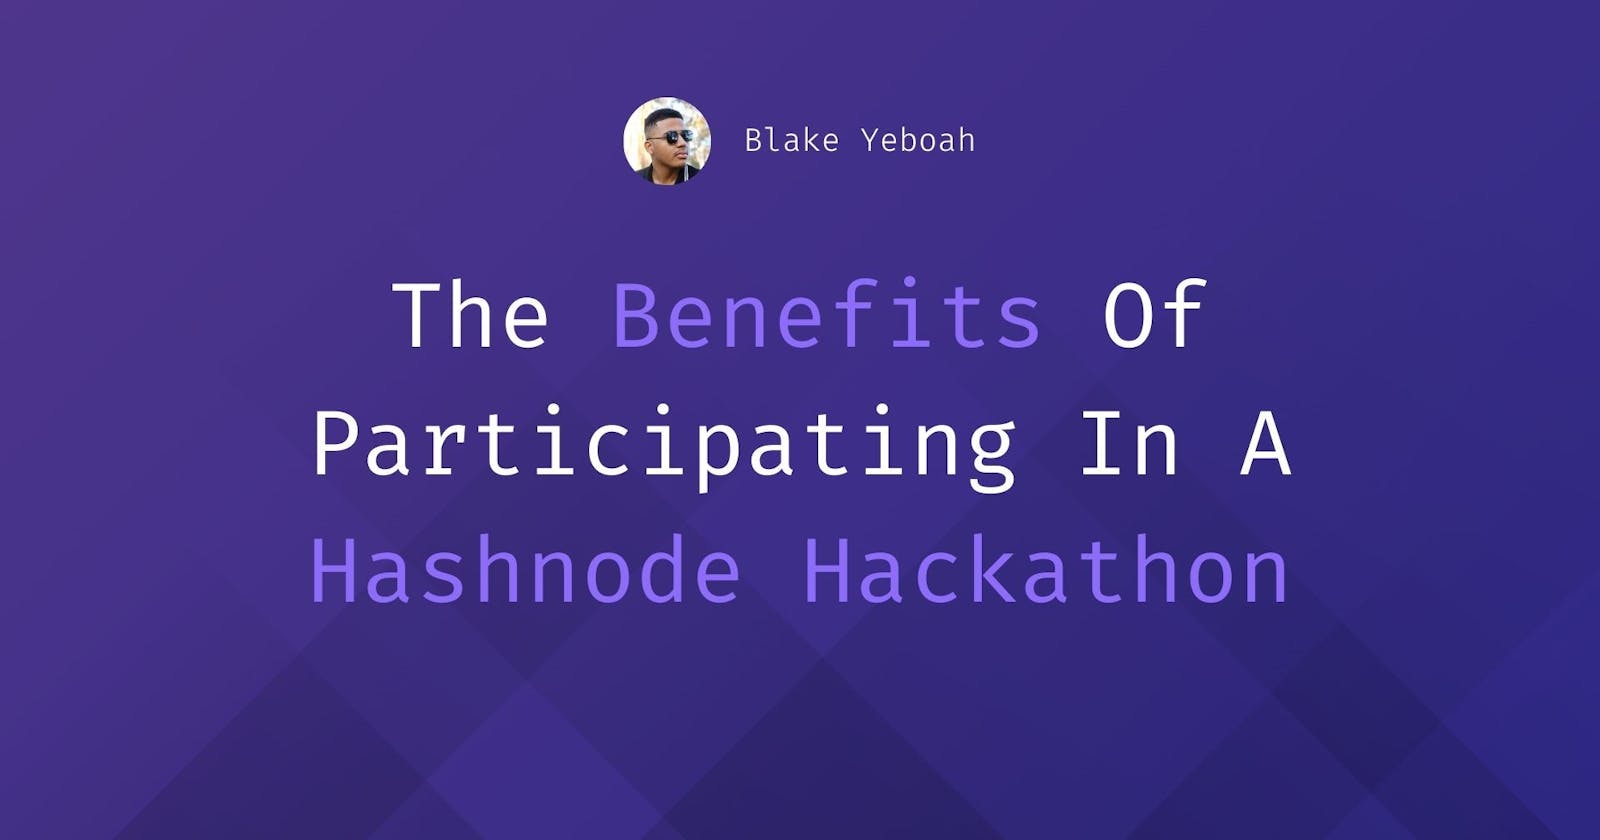 The Benefits Of Participating In A Hashnode Hackathon